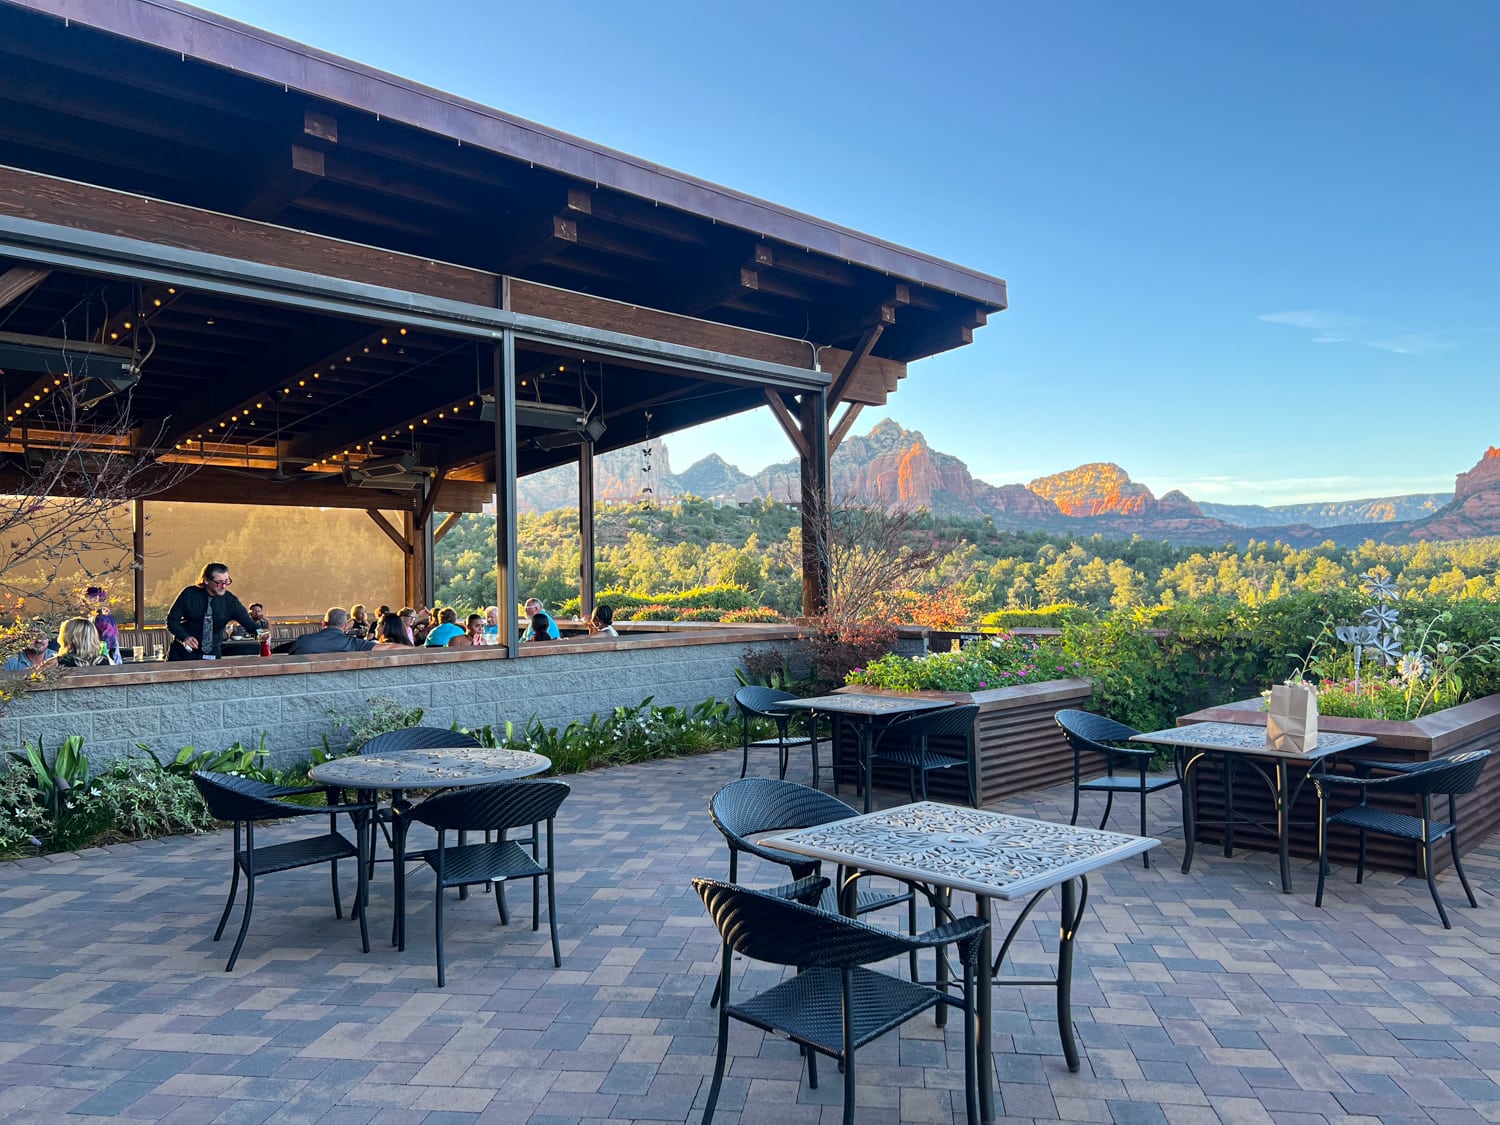 Mariposa is one of the top Sedona restaurants with a view of the red rock canyons